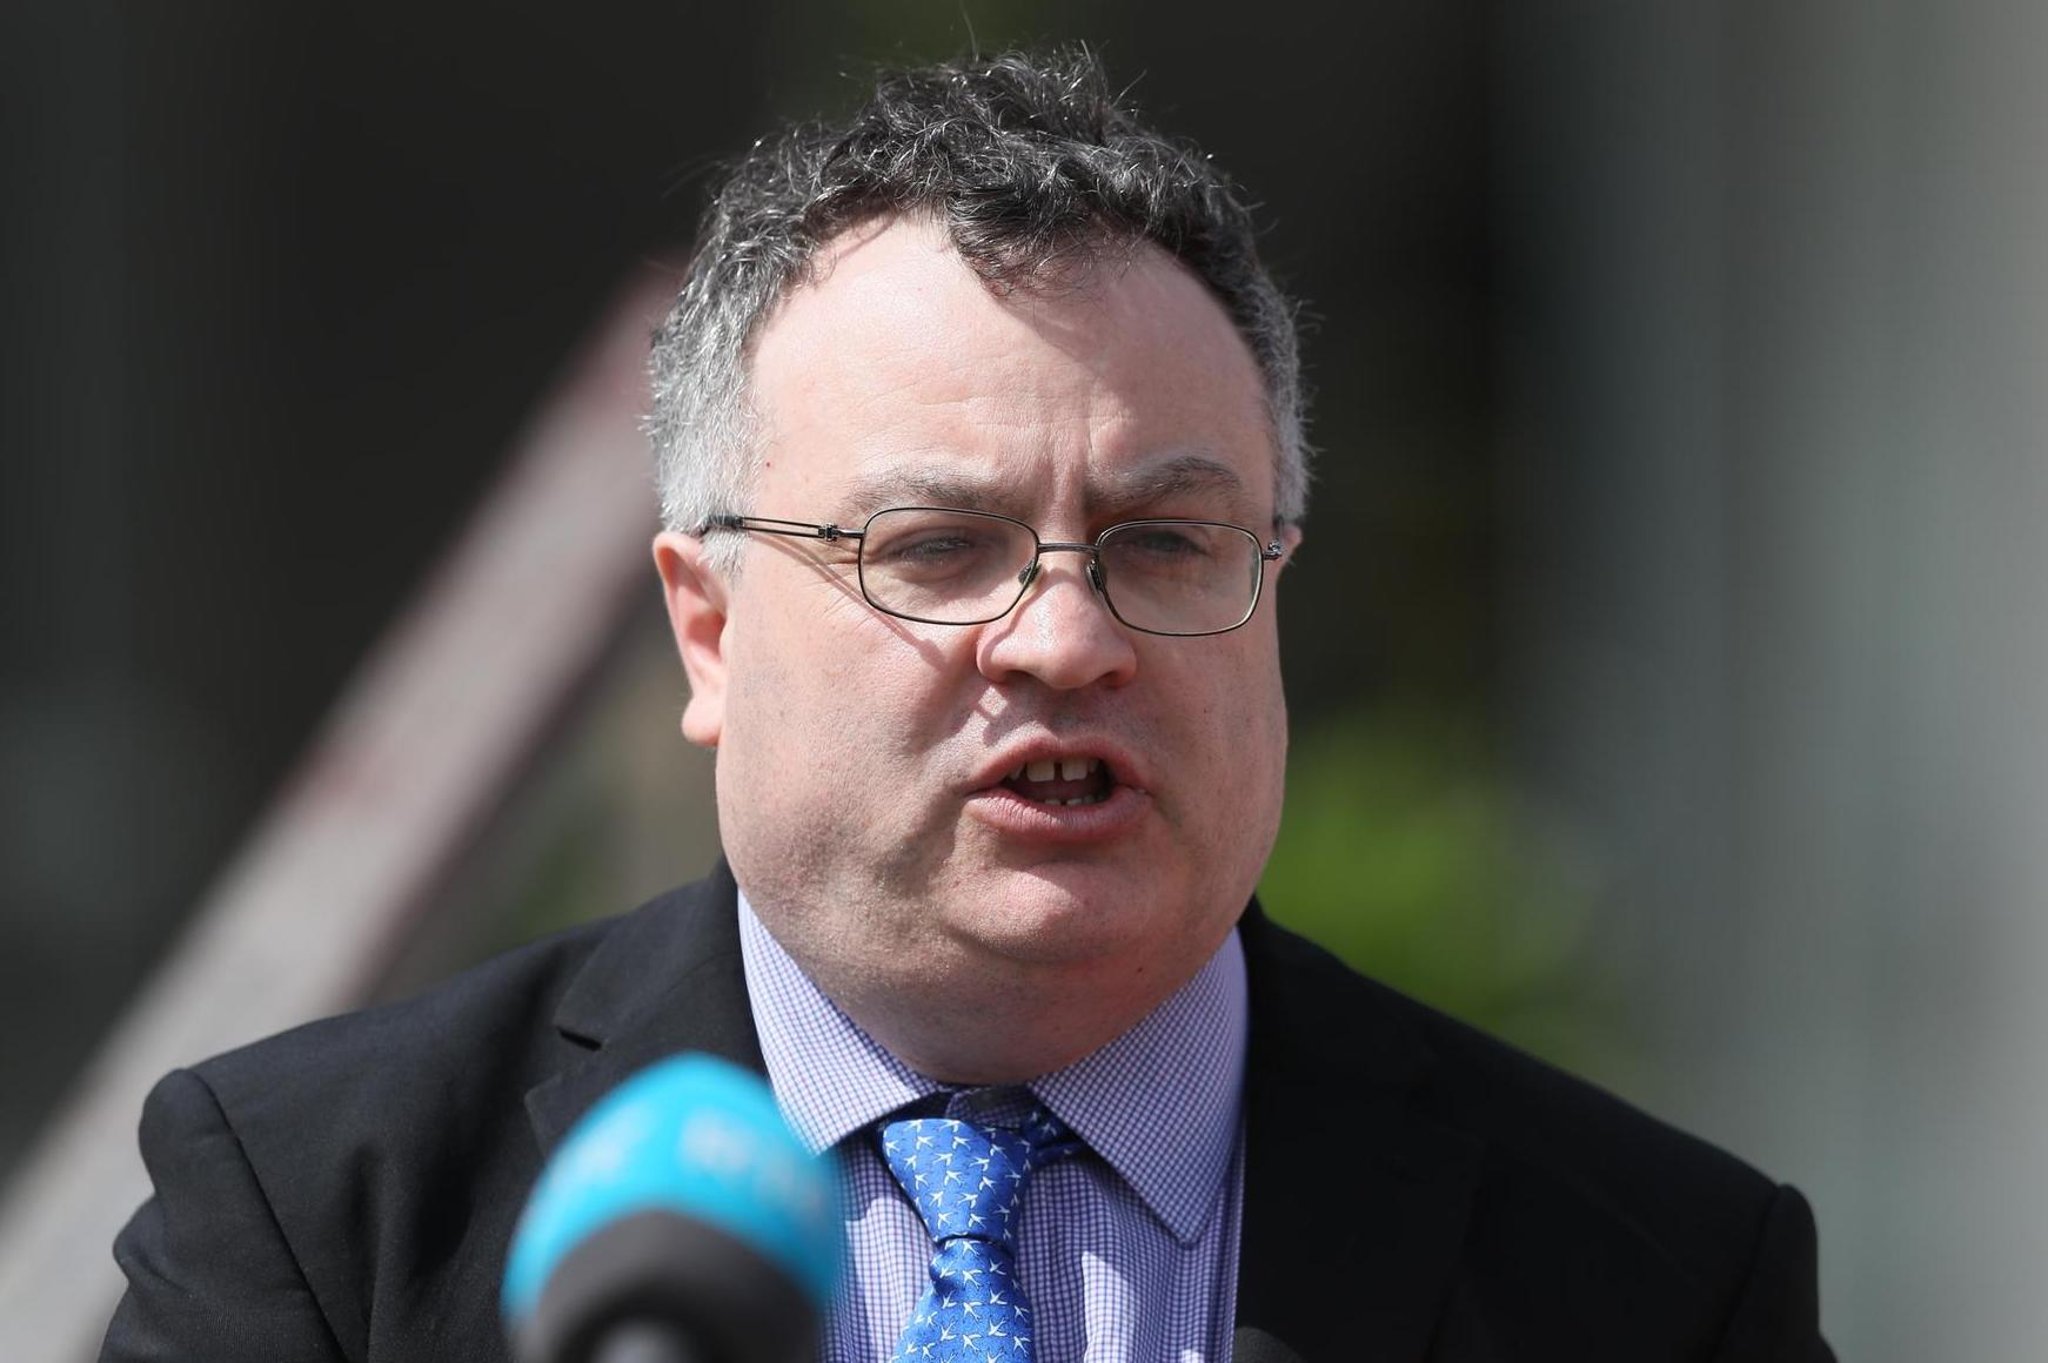 Moves by UK Government on Protocol will make it harder to address issues, Alliance MP Stephen Farry has said